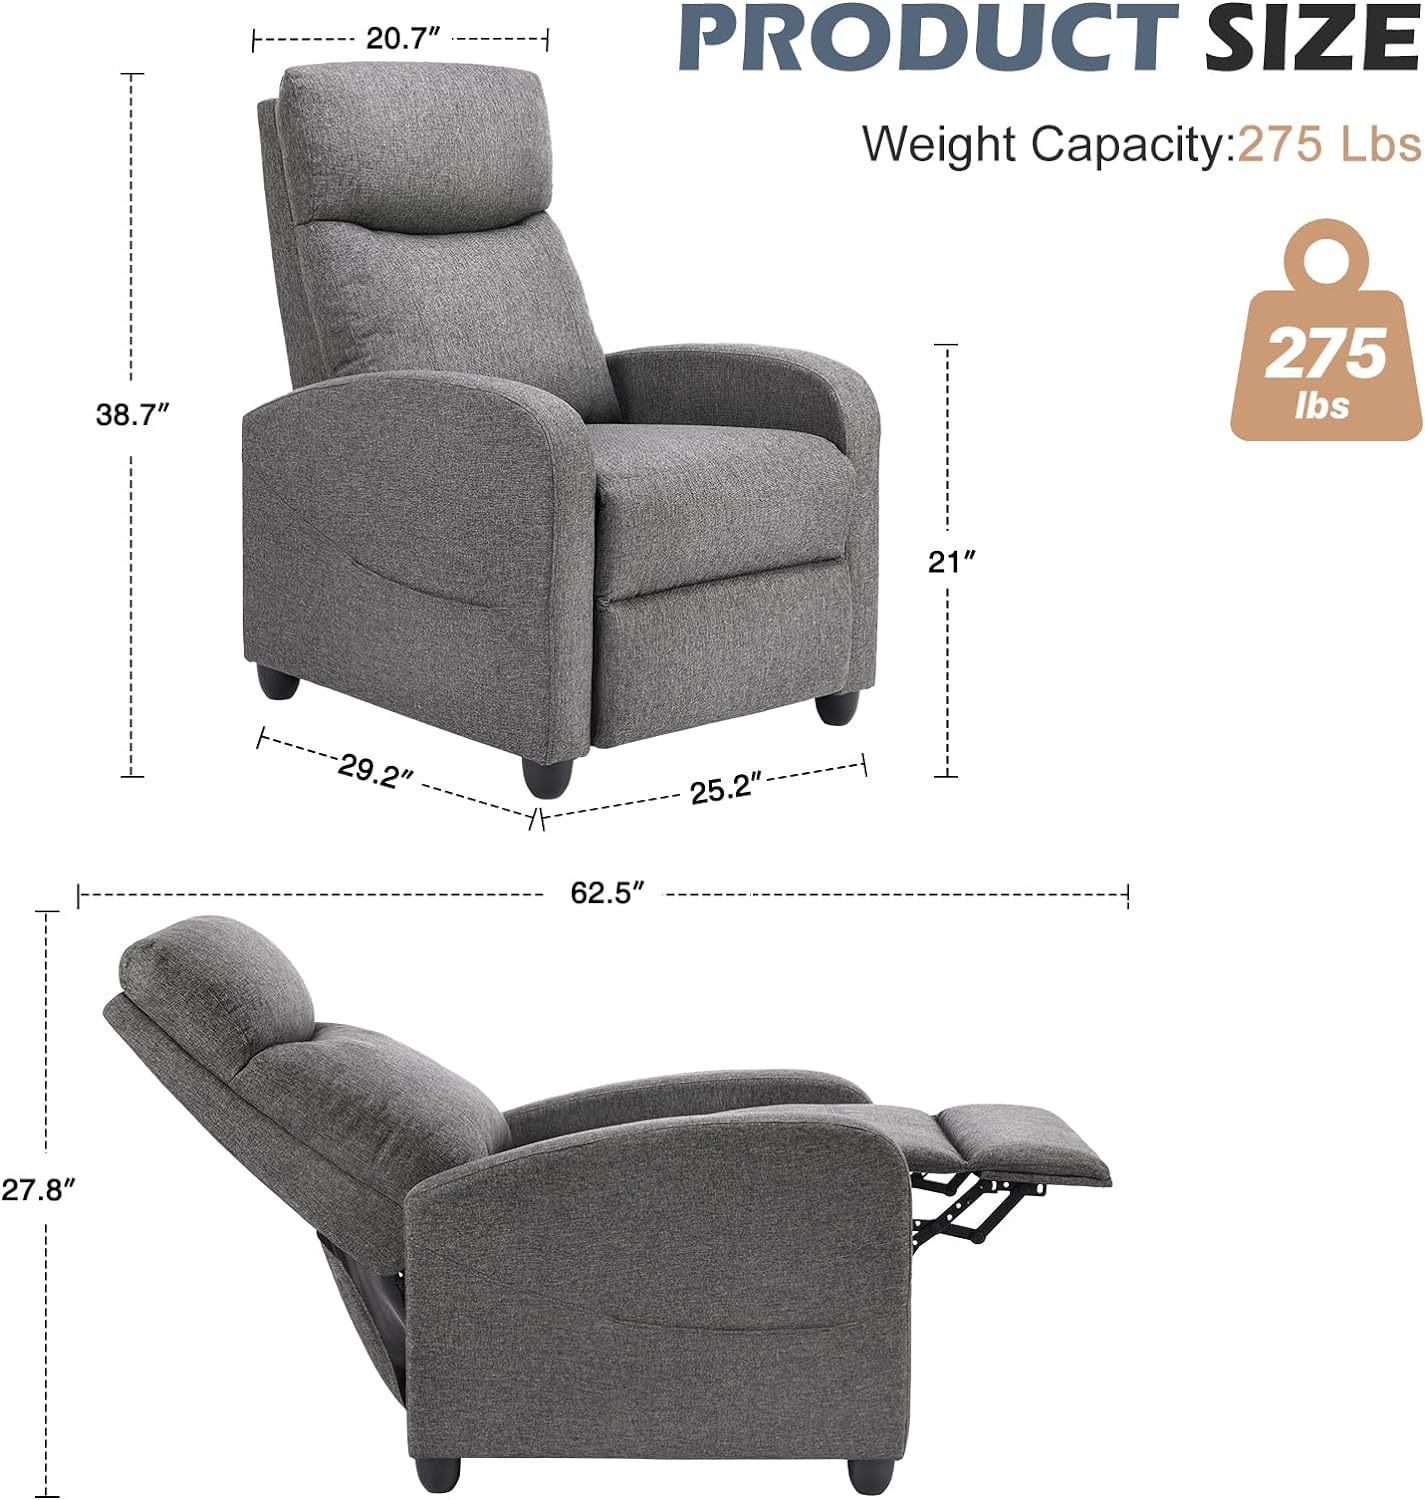 Recliner Chair Massage Reclining for Adults, Comfortable Fabric Recliner Sofa Adjustable Home Theater Seating Lounge with Padded Seat Backrest, Small Recliners for Living Room, Bedroom (Grey)